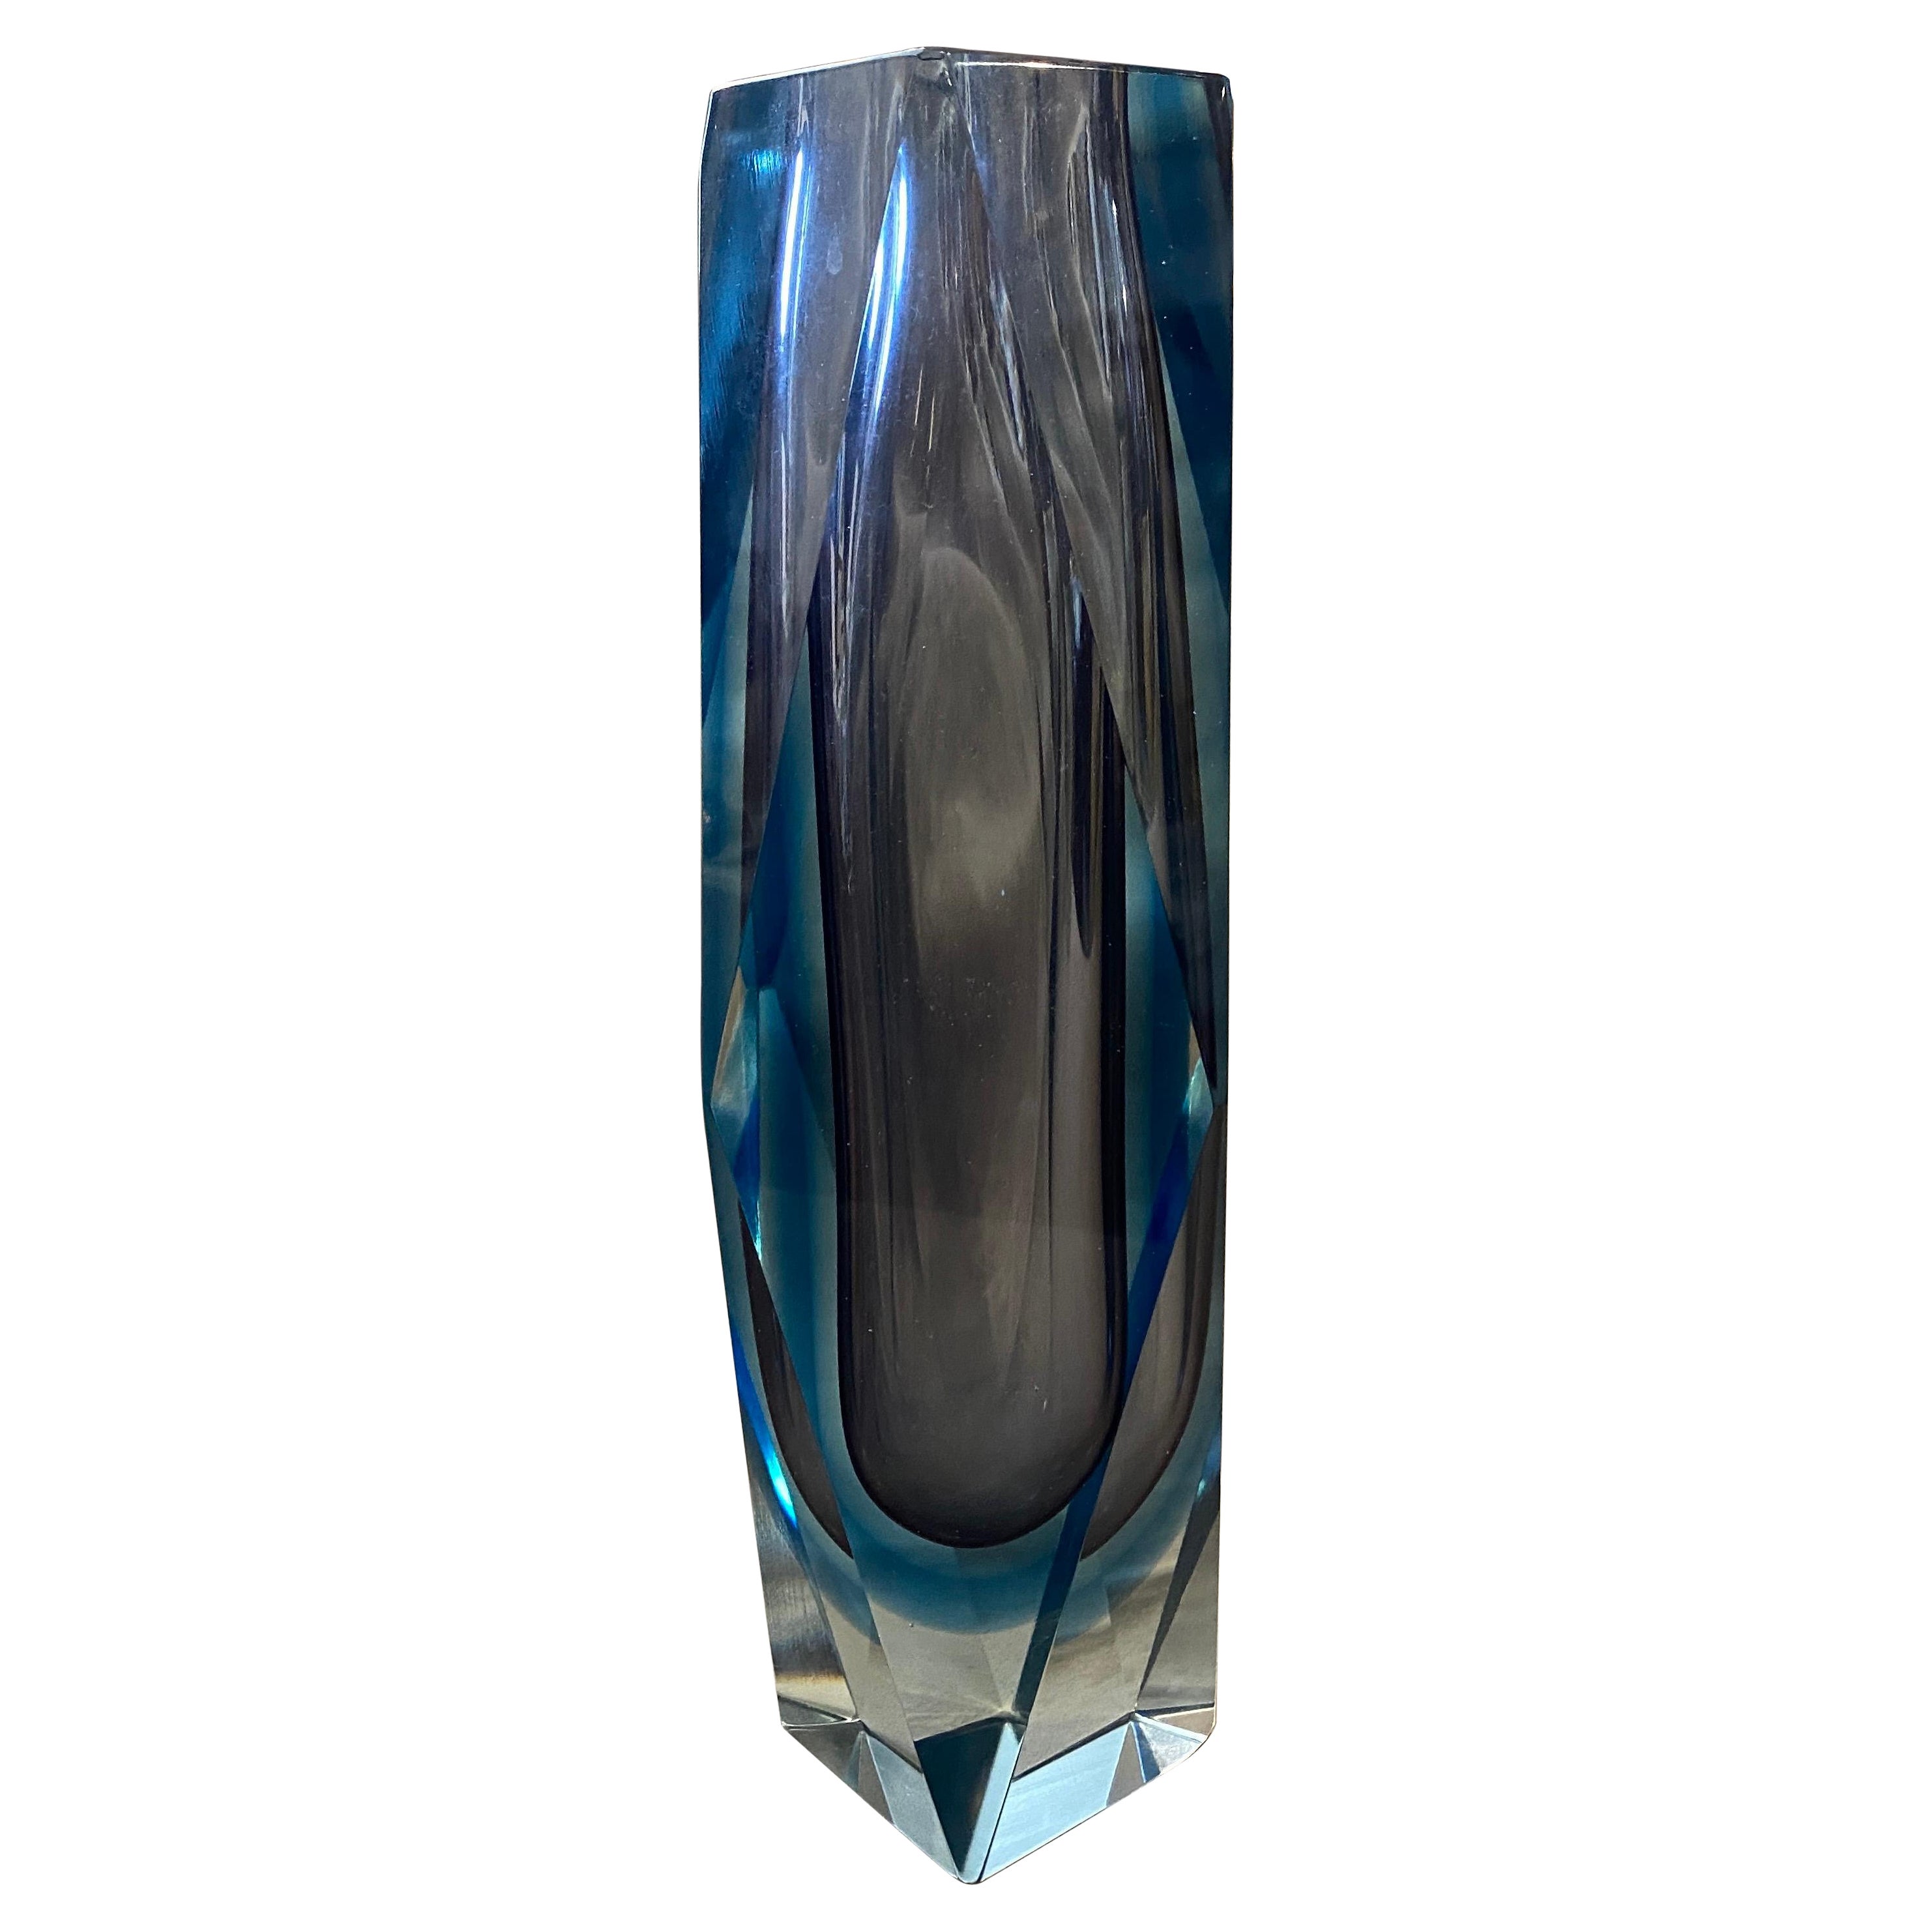 An iconic murano glass vase made in the Seventies. the light blue and purple heavy glass it's in perfect condition.